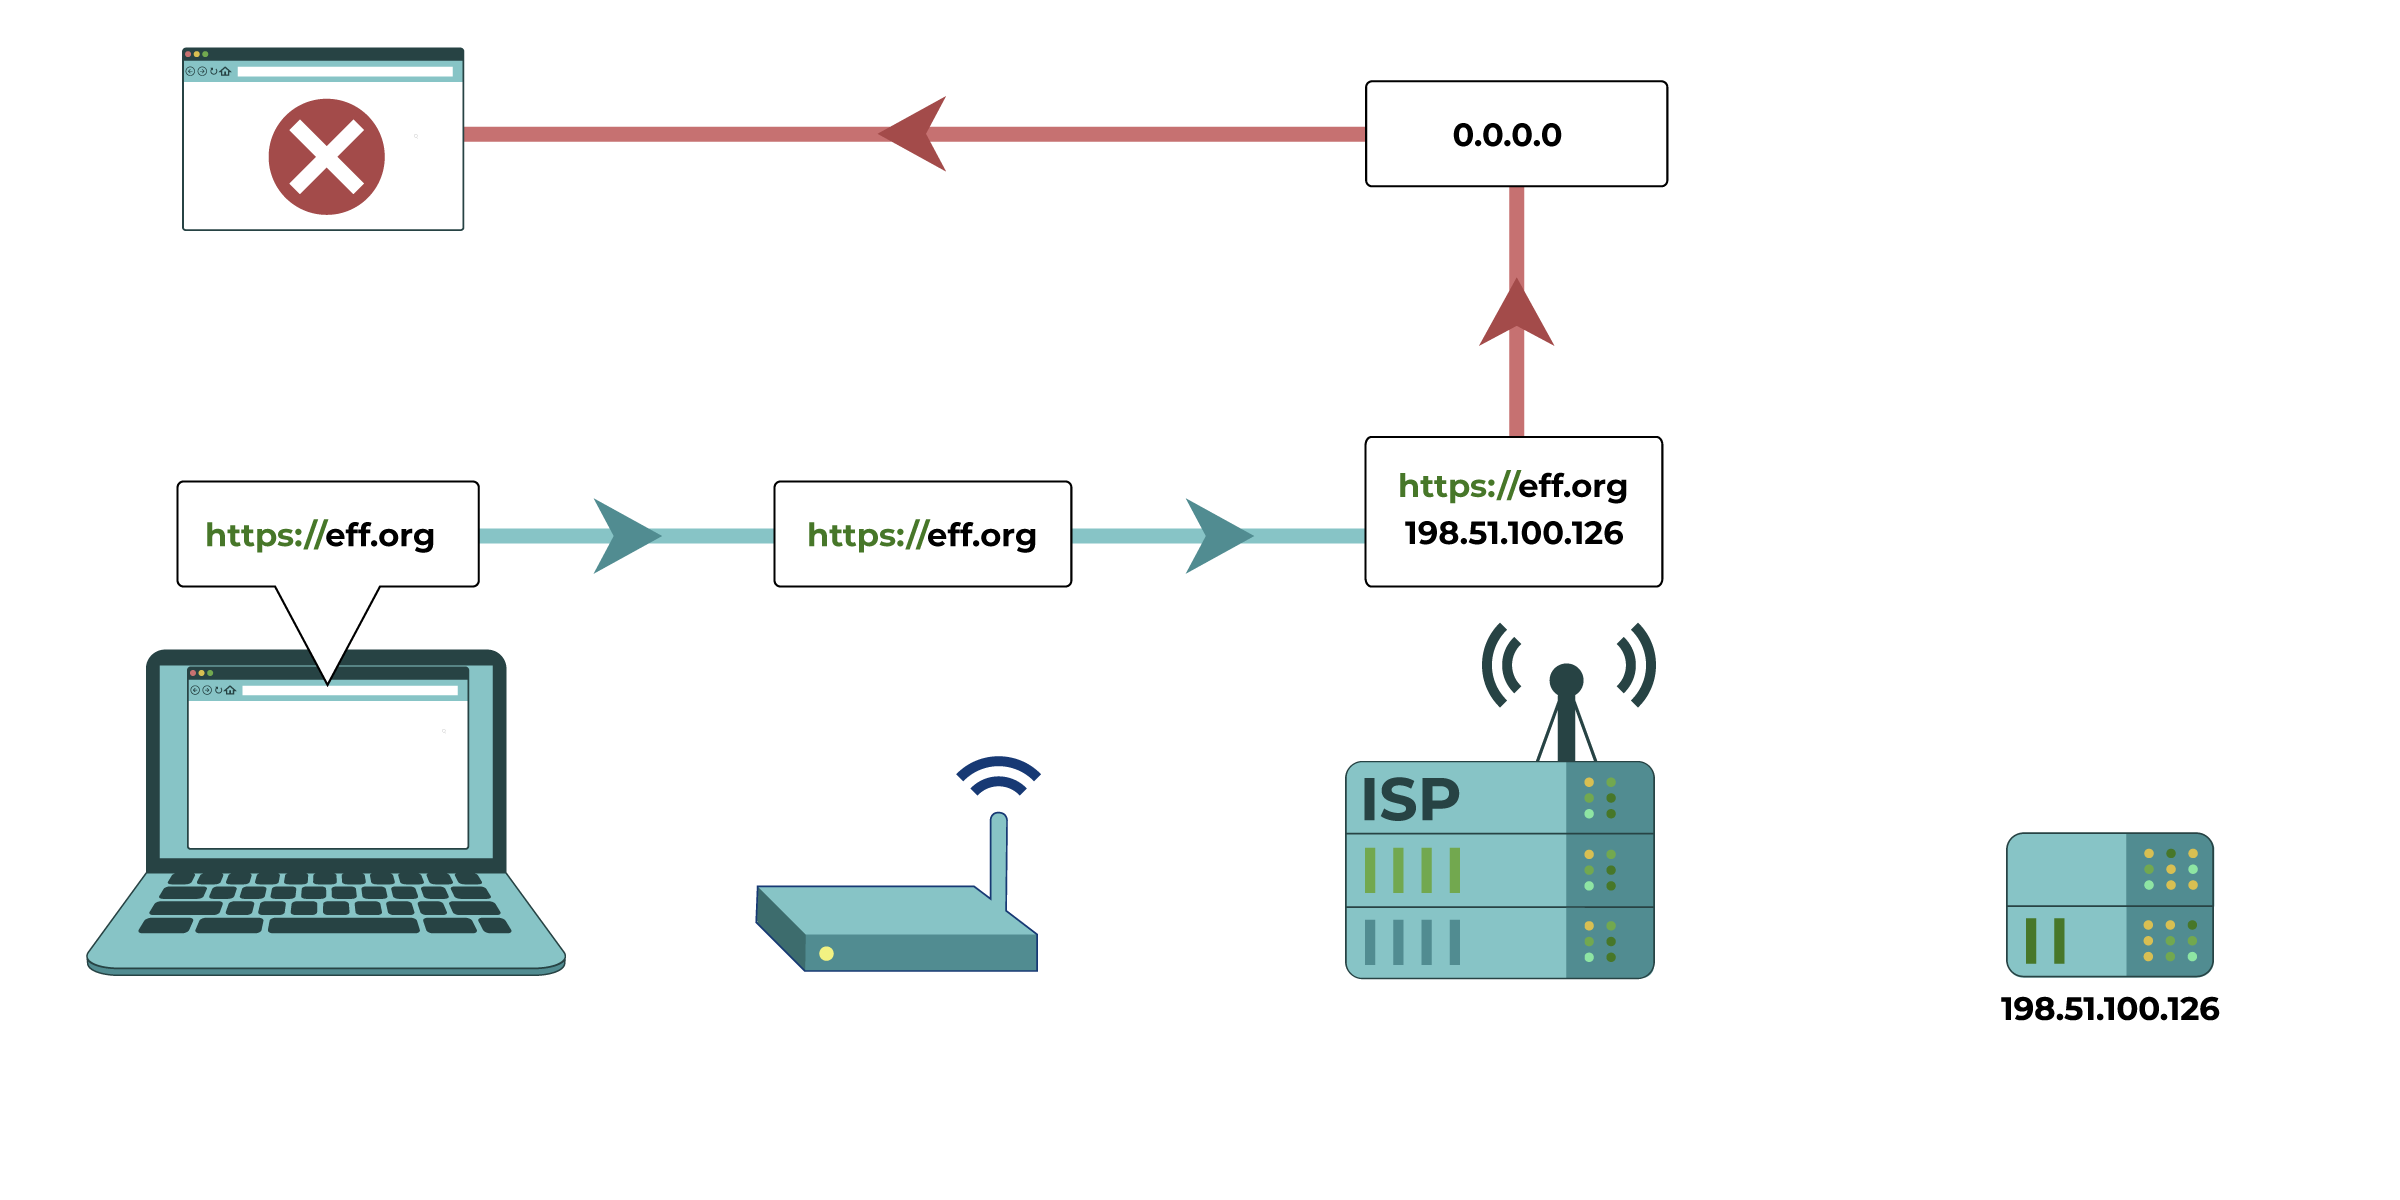 In this diagram, the request for eff.org’s IP address is modified at the Internet Service Provider level. The ISP interferes with the DNS resolver, and the IP address is redirected to give an incorrect answer or no answer.